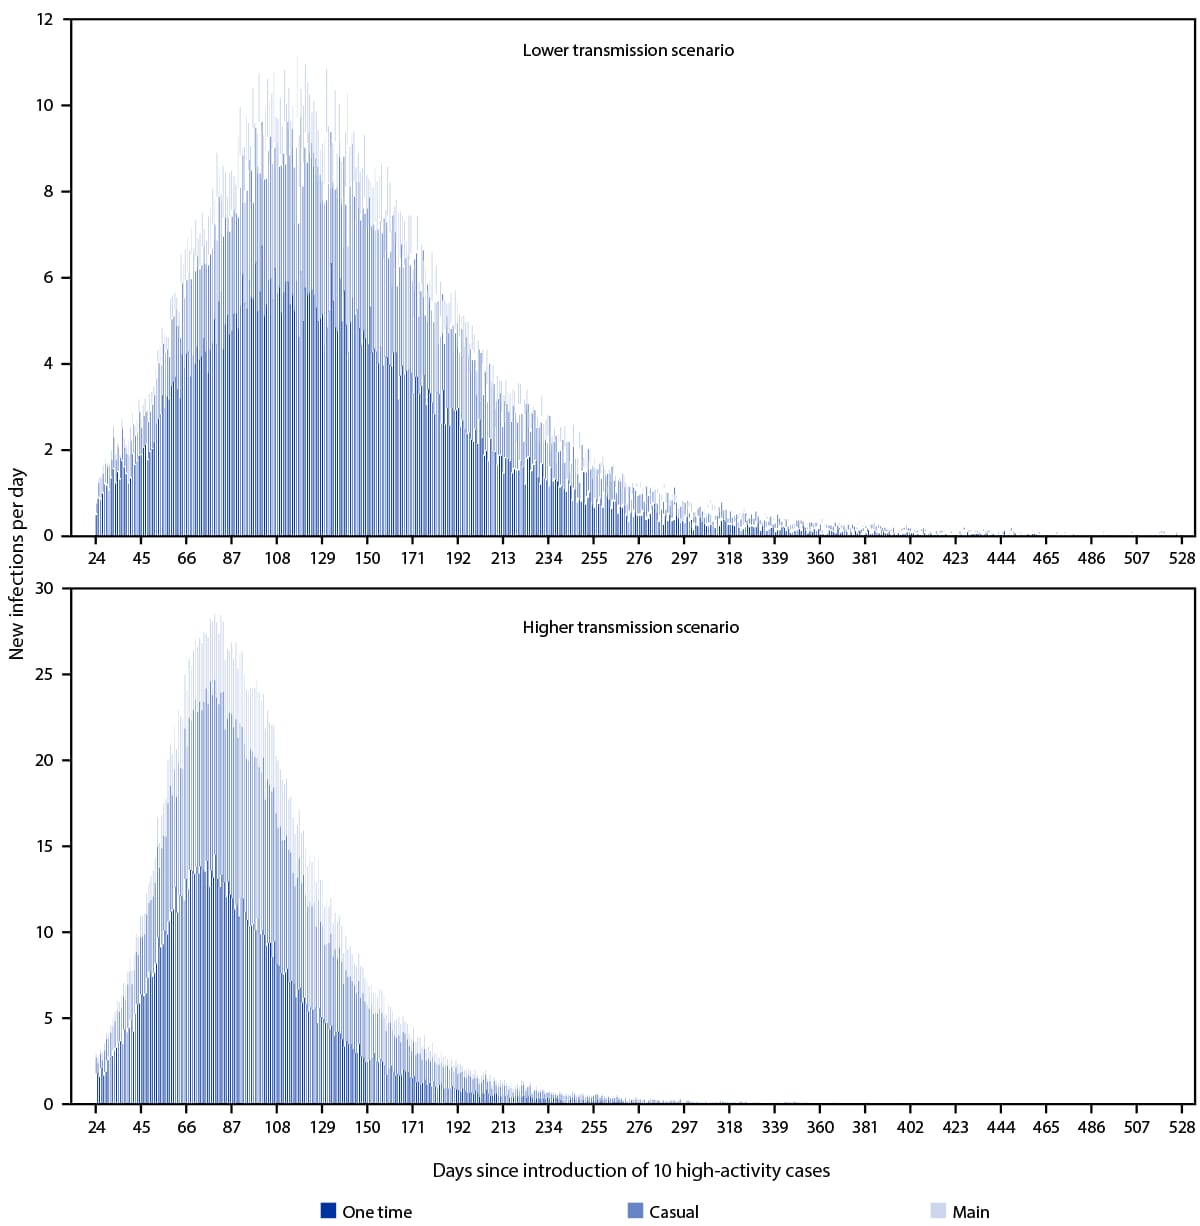 This is a figure showing the modeled number of new infections per day by lower and higher transmission scenario and type of partnership over the course of a monkeypox outbreak among men who have sex with men, by time since importation of 10 high activity cases in the United States